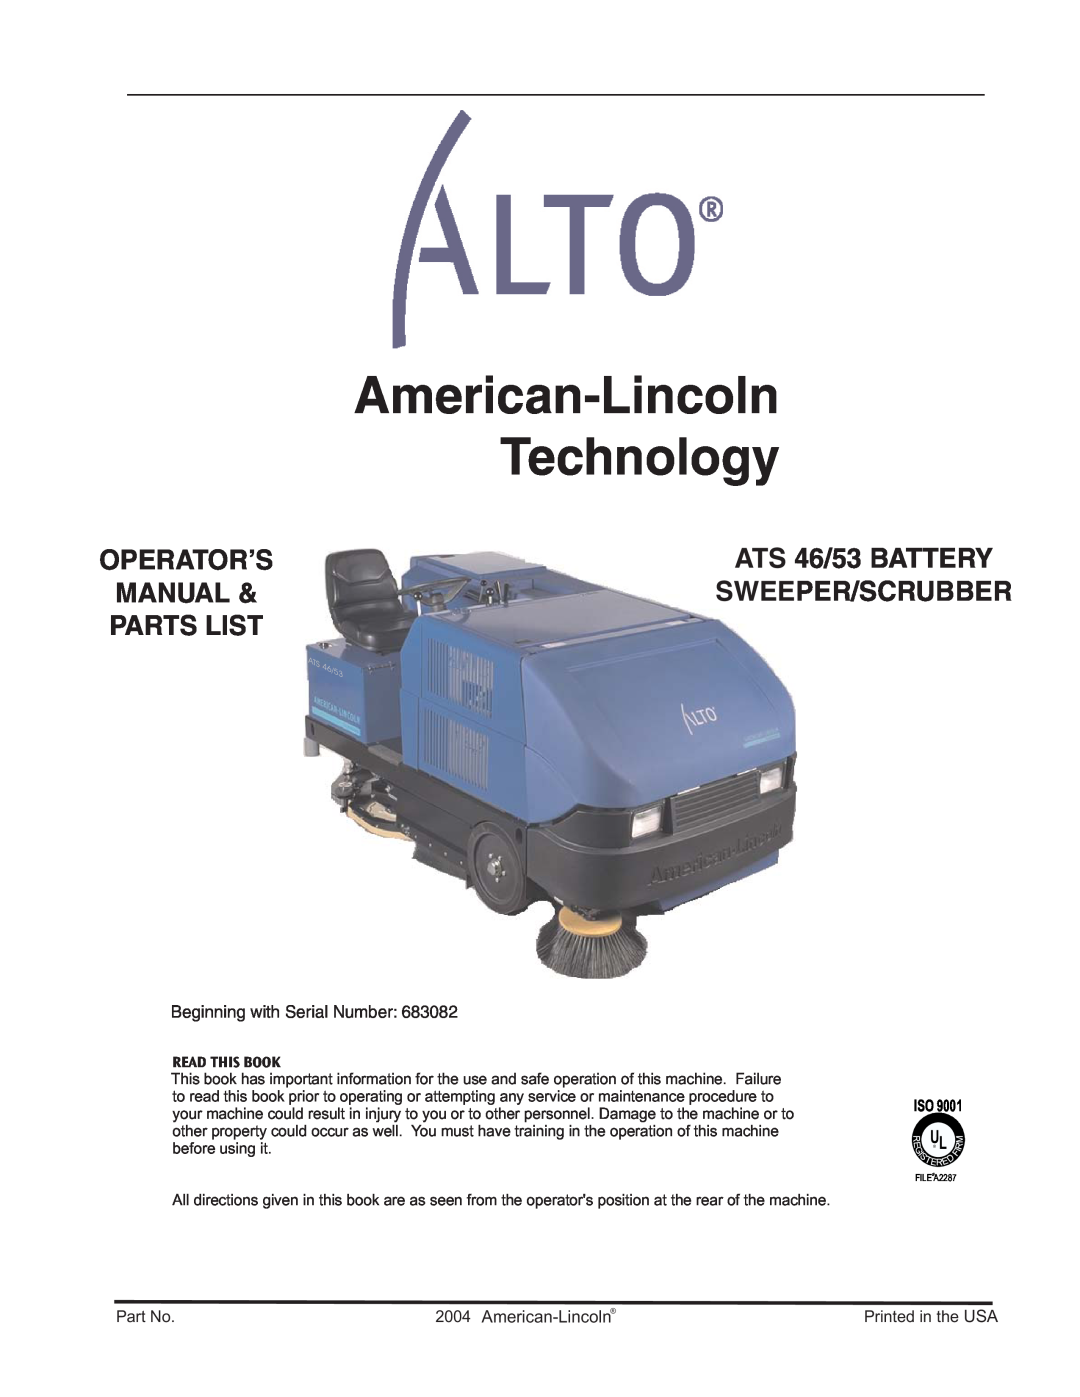 Nilfisk-ALTO manual American-Lincoln Technology, Operator’S, ATS 46/53 BATTERY, Manual, Sweeper/Scrubber, Parts List 